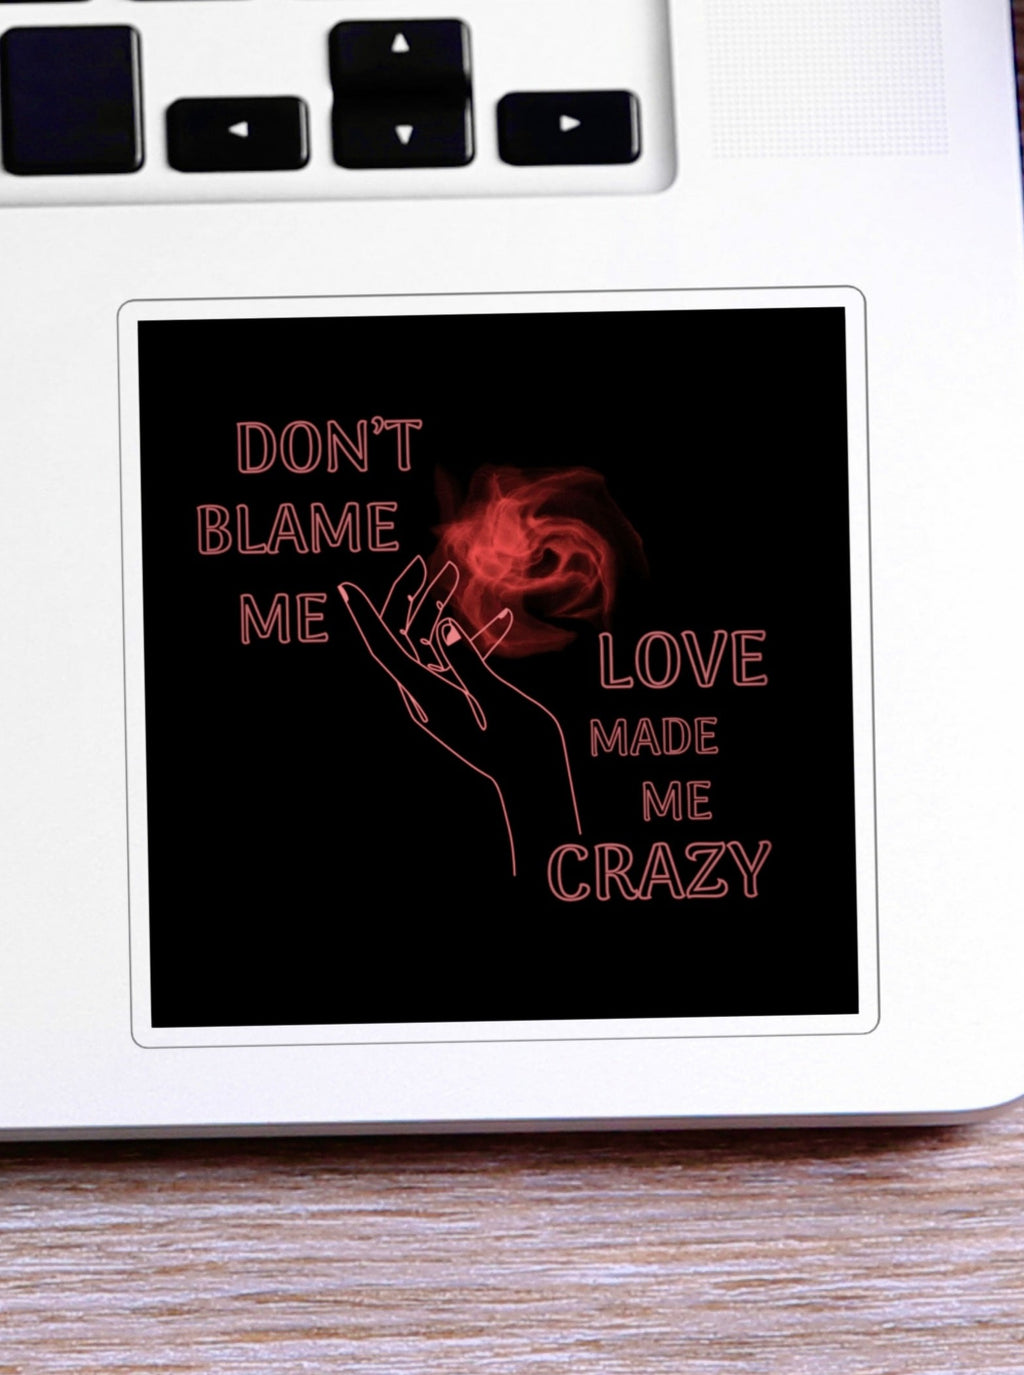 “Don’t Blame Me Love Made Me Crazy” Wanda Maximoff, Scarlet Witch in Doctor Strange in the Multiverse of Madness, Taylor Swift Song Lyric Quote Sticker